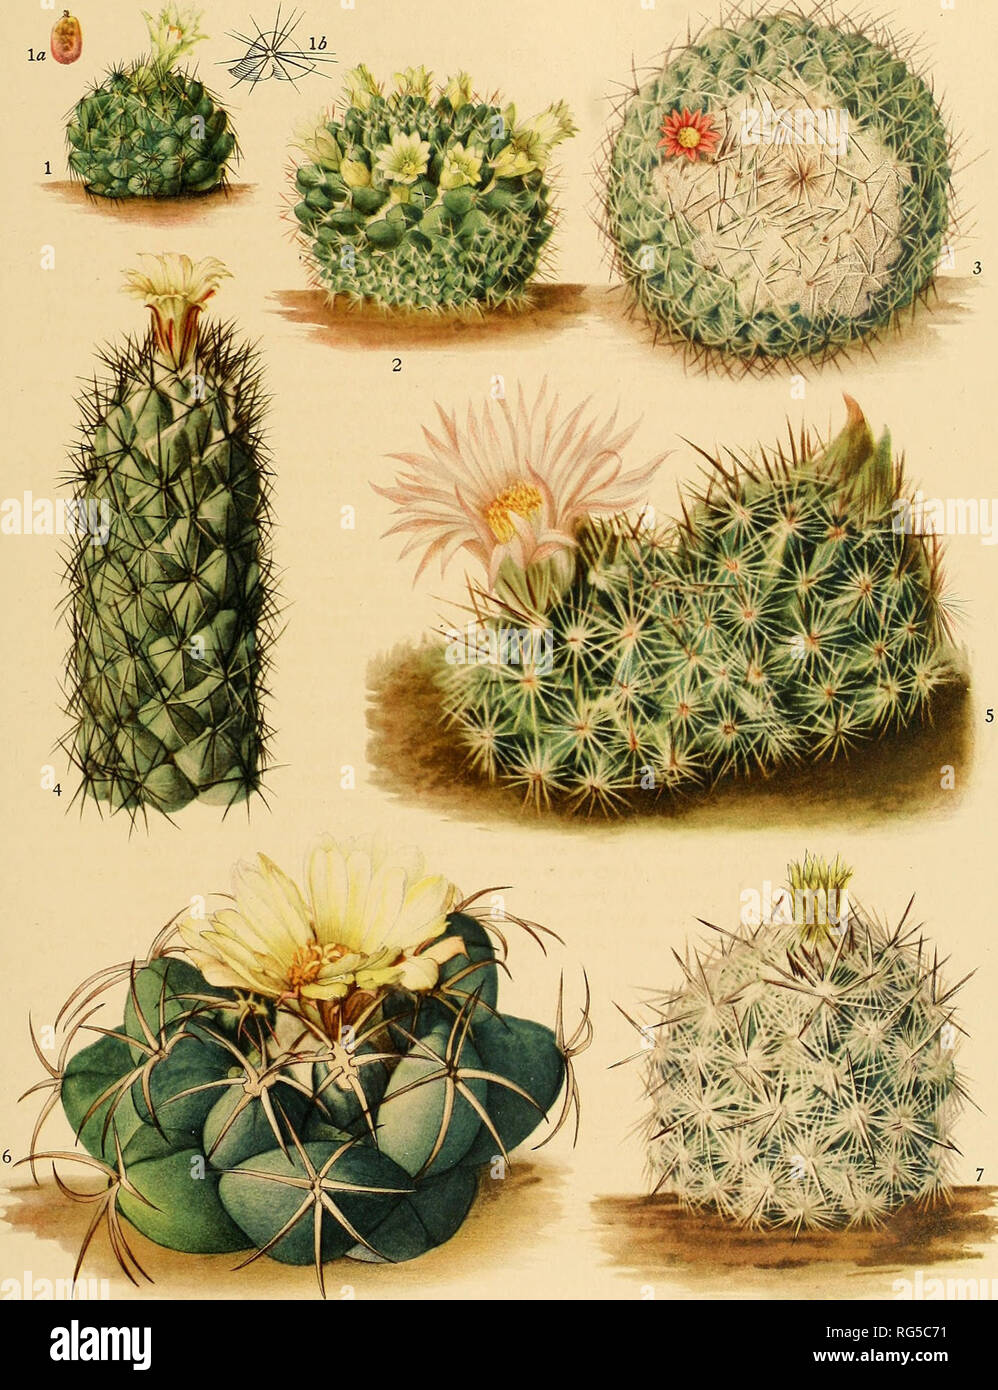 . The Cactaceae : descriptions and illustrations of plants of the cactus family. BRITTON AND ROSE, VOL. IV. M. E. Eaton del. 1 to 4, 6, 7 A. A. Newton del. 5 1. Flowering plant of Coryphantha cubensis. la. Fruit of same. Id. Tubercle of same. 2. Flowering plant of Neomammillaria confusa. 3. Flowering plant of Neomammillaria geminispina. 4. Top of flowering plant of Coryphantha durangensis. 5. Flowering plant of Coryphantha arizojiica. 6. Flowering plant of Coryphantha bumamma. 7. Flowering plant of Coryphantha chlorantha.. Please note that these images are extracted from scanned page images th Stock Photo